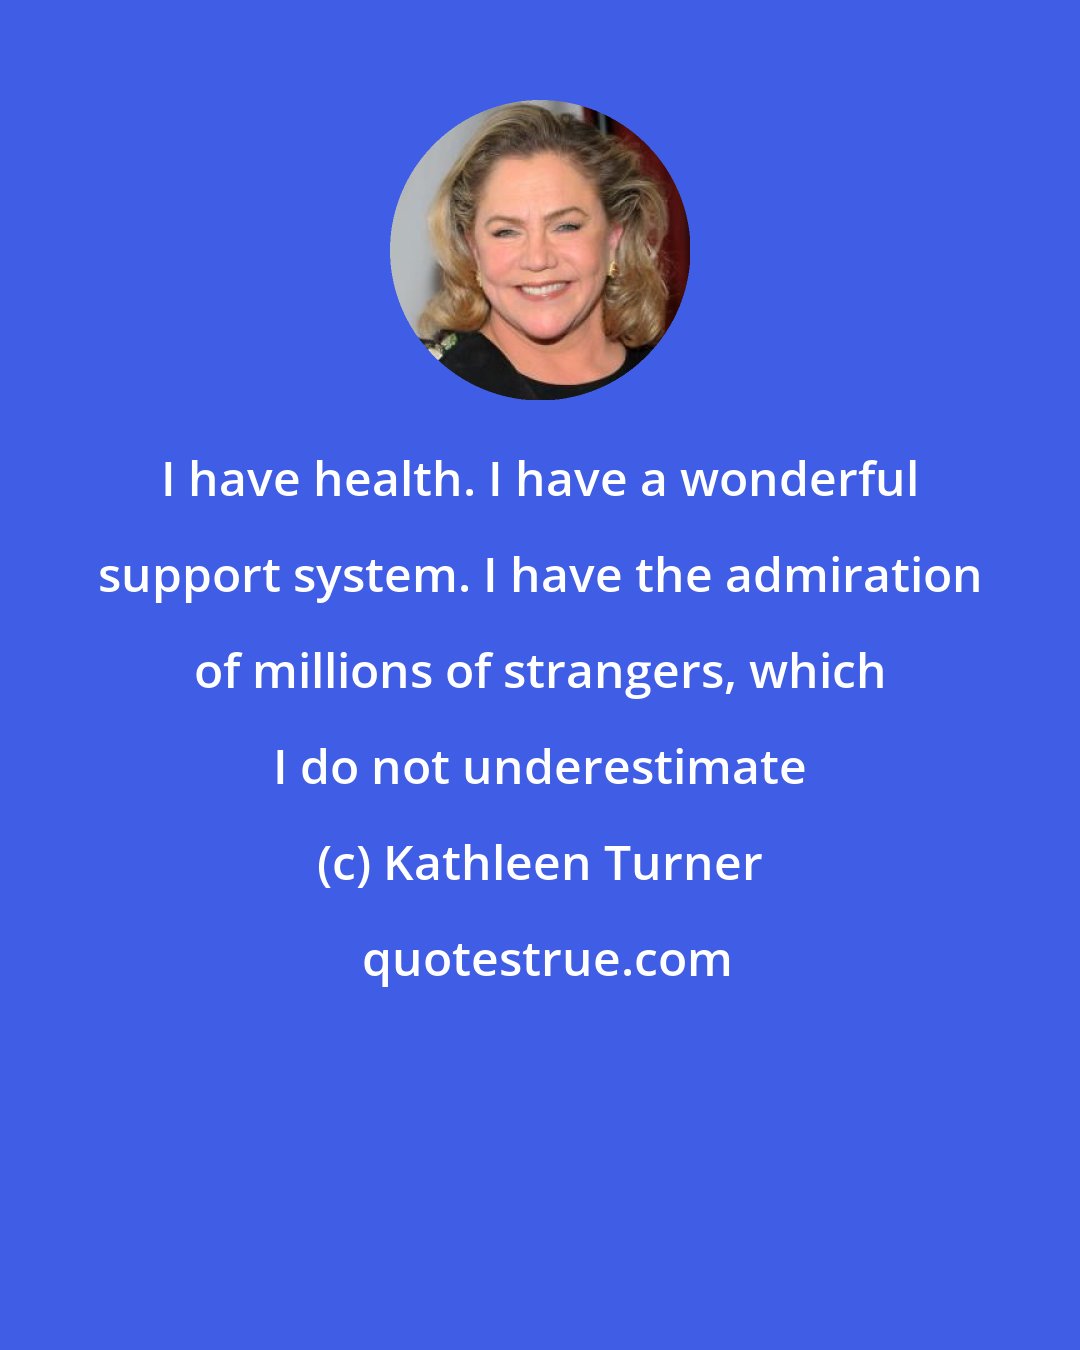 Kathleen Turner: I have health. I have a wonderful support system. I have the admiration of millions of strangers, which I do not underestimate